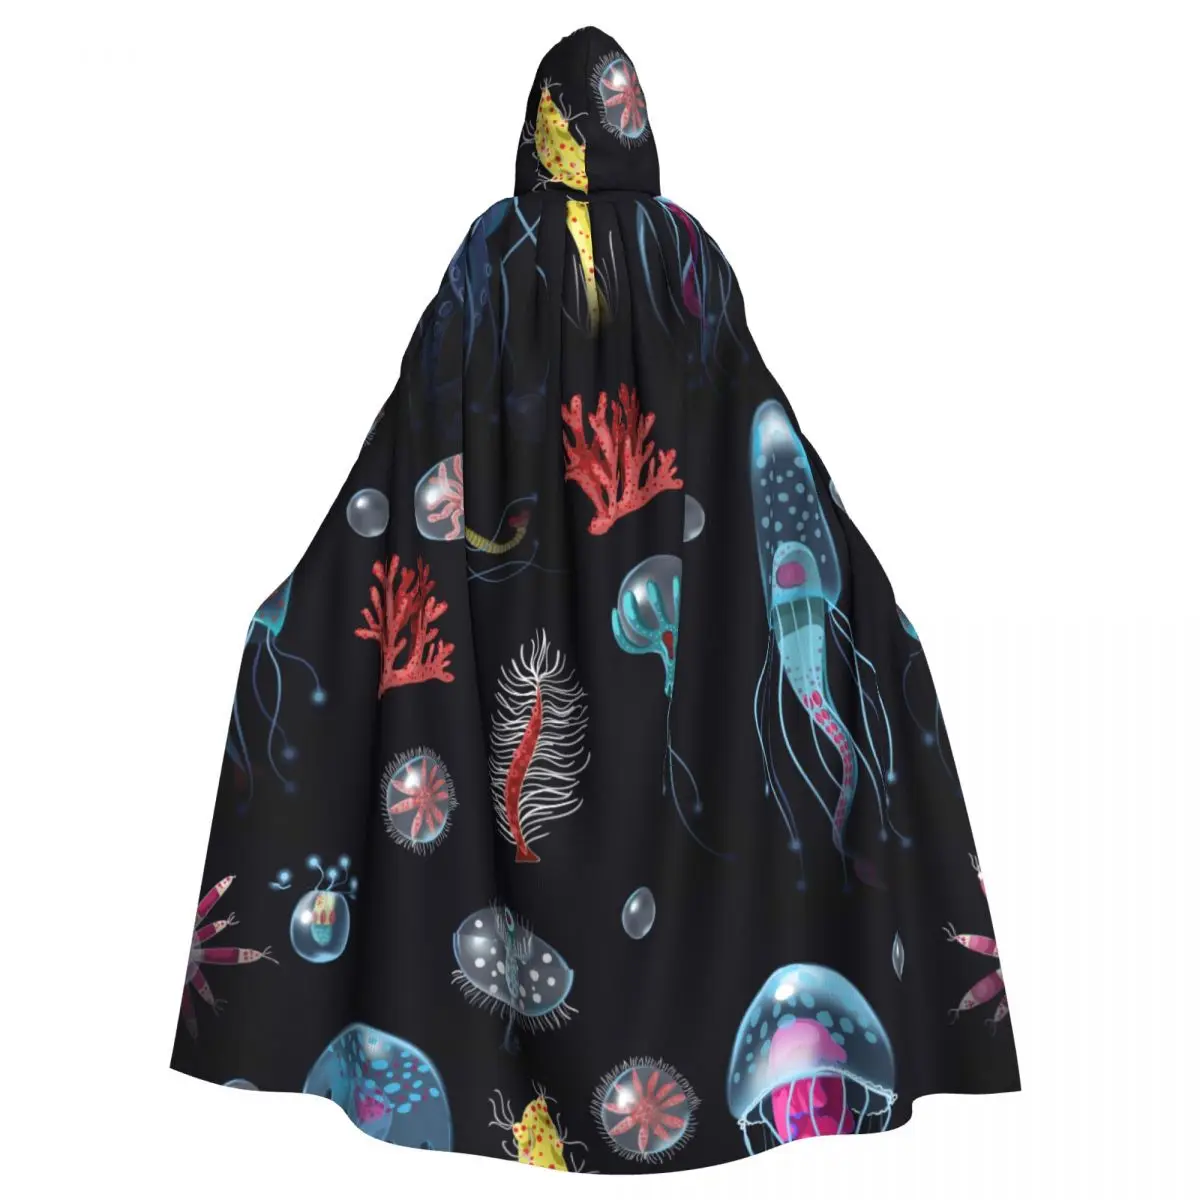 

Hooded Cloak Unisex Cloak with Hood Jellyfish Corals Seaweed Cloak Vampire Witch Cape Cosplay Costume